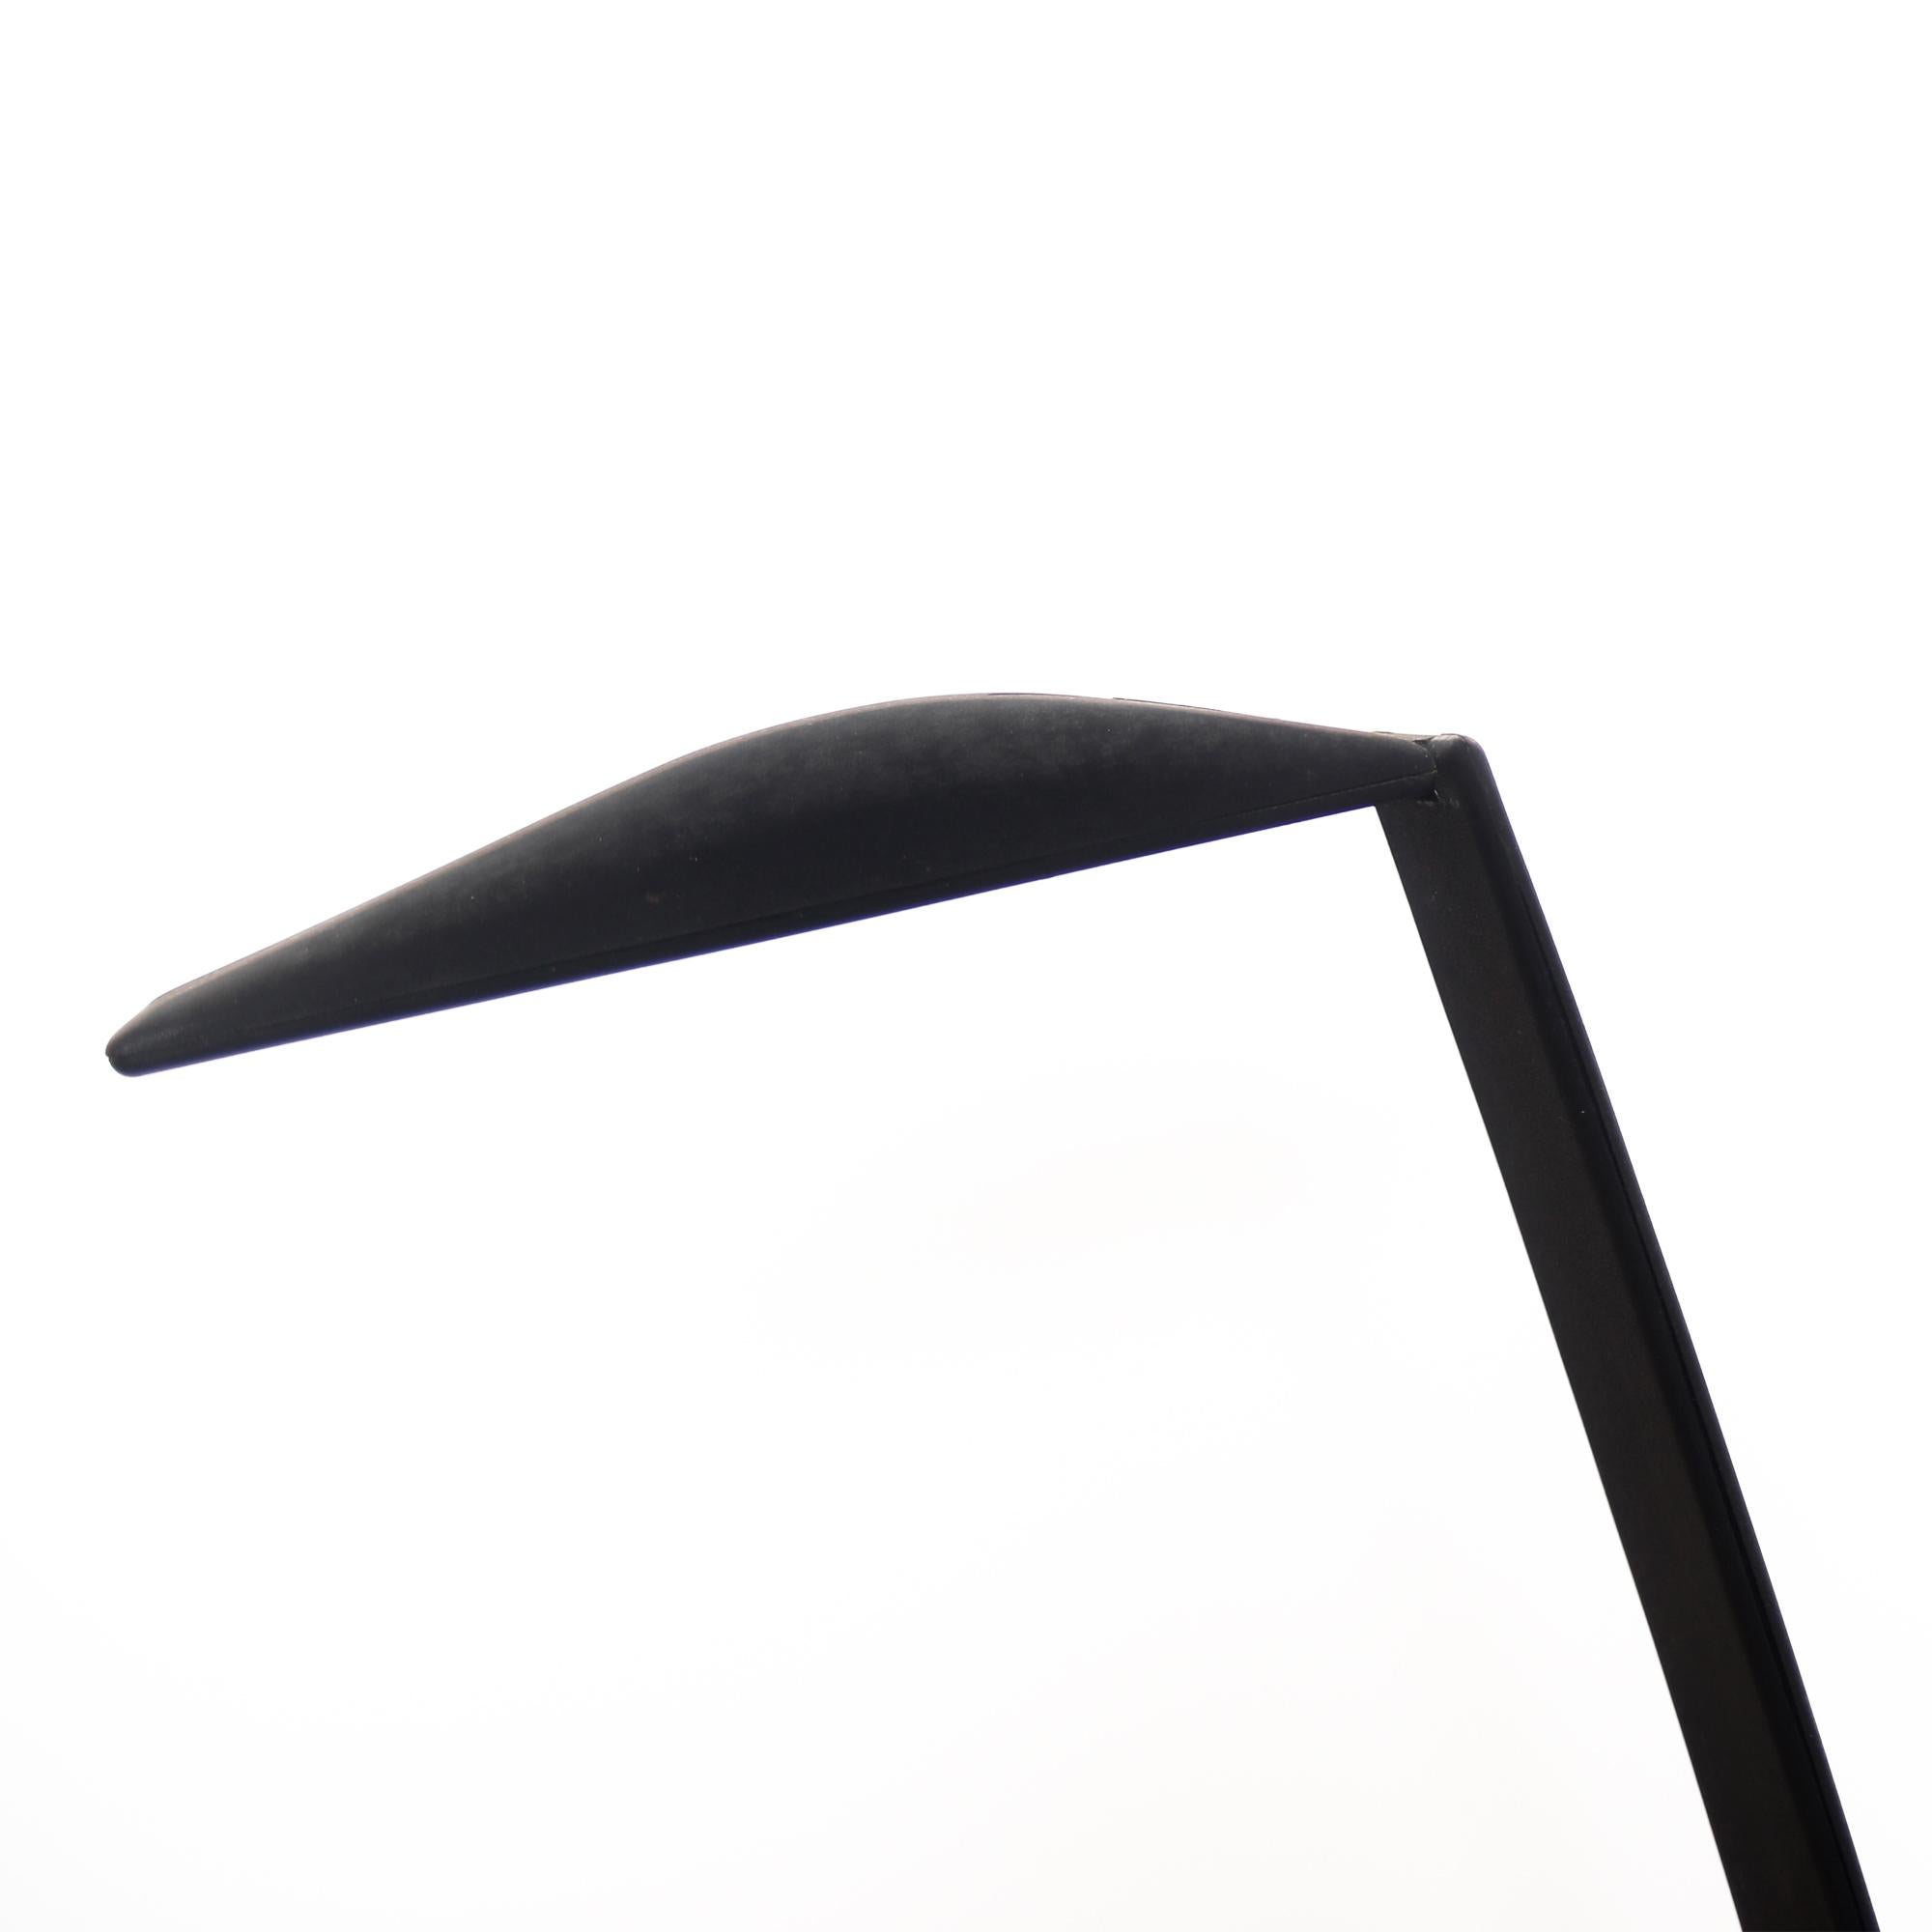 The “Dove” model desk lamp was designed by Mario Barbaglia and Marco Colombo for PAF Studio in Milan, Italy, 1980s
Made of black lacquered metal it is a swiveling base and the arm is adjustable up and down. Has a halogen bulb and an on/off switch.